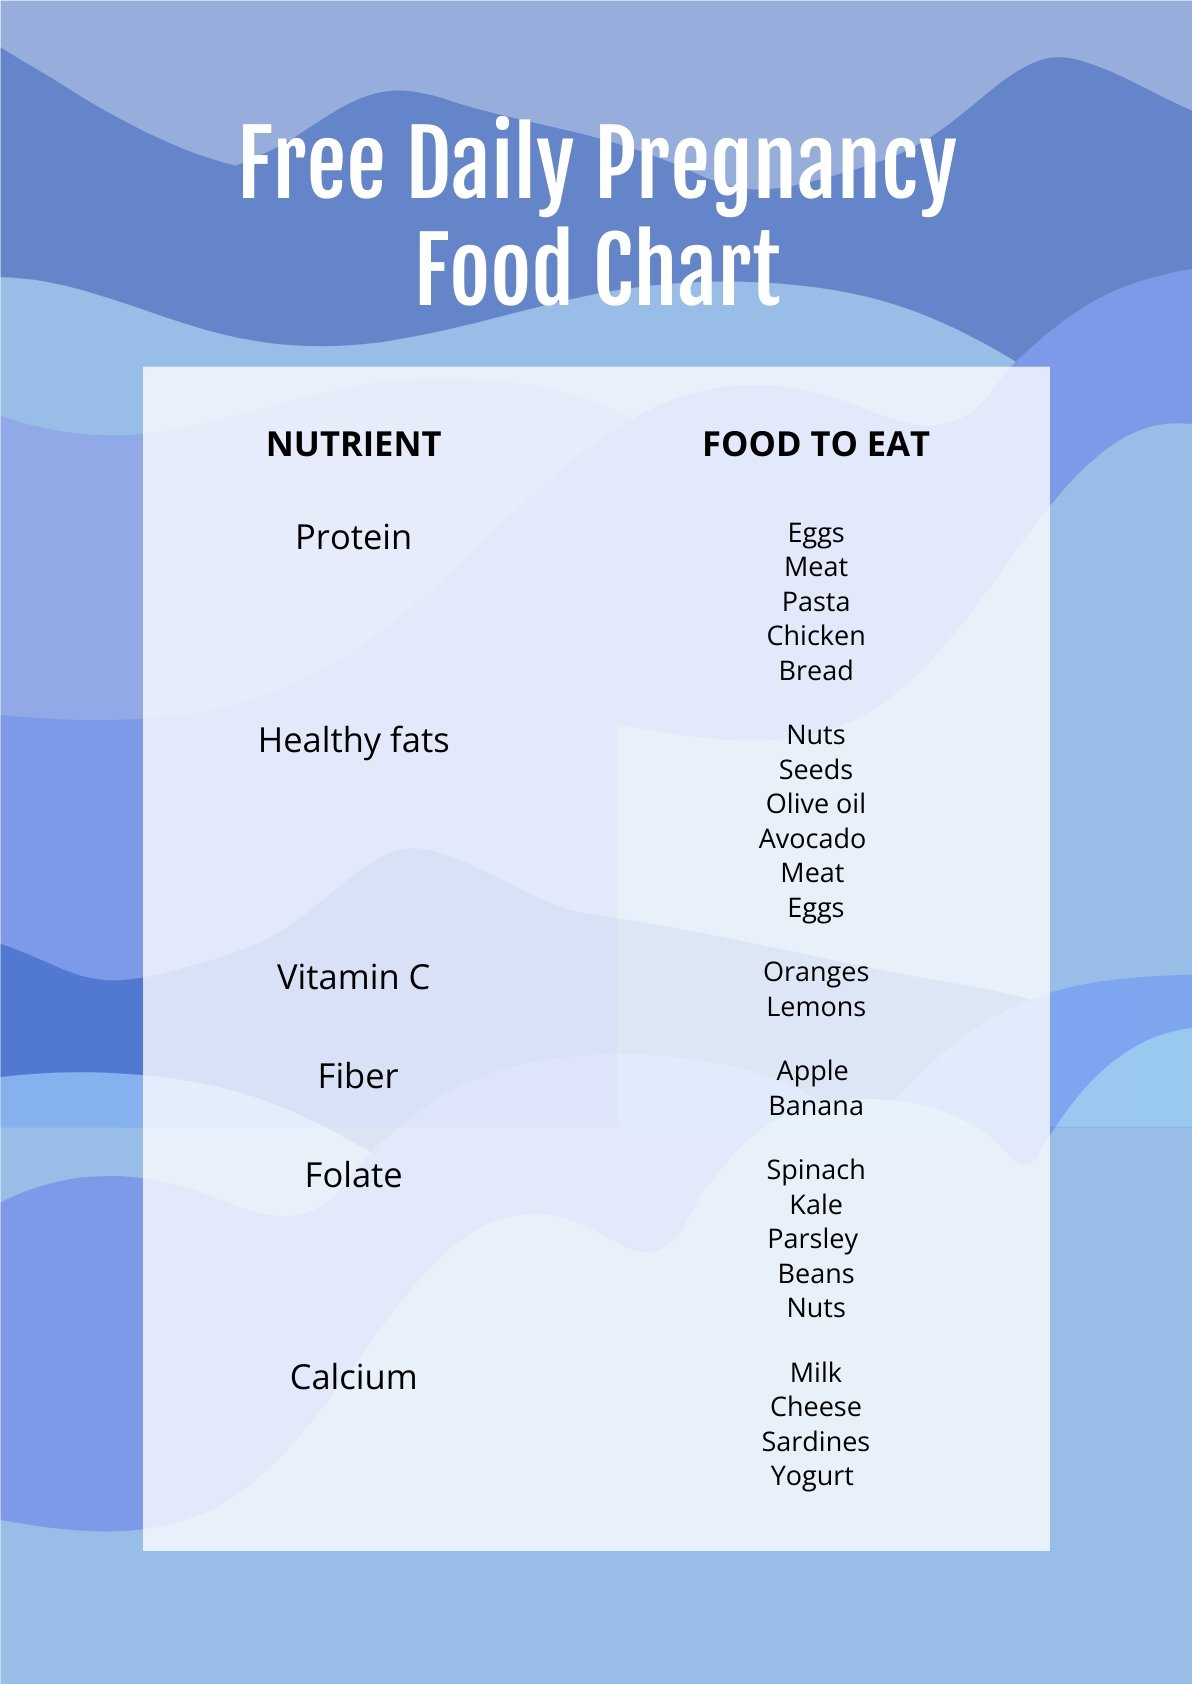 Free Daily Pregnancy Food Chart